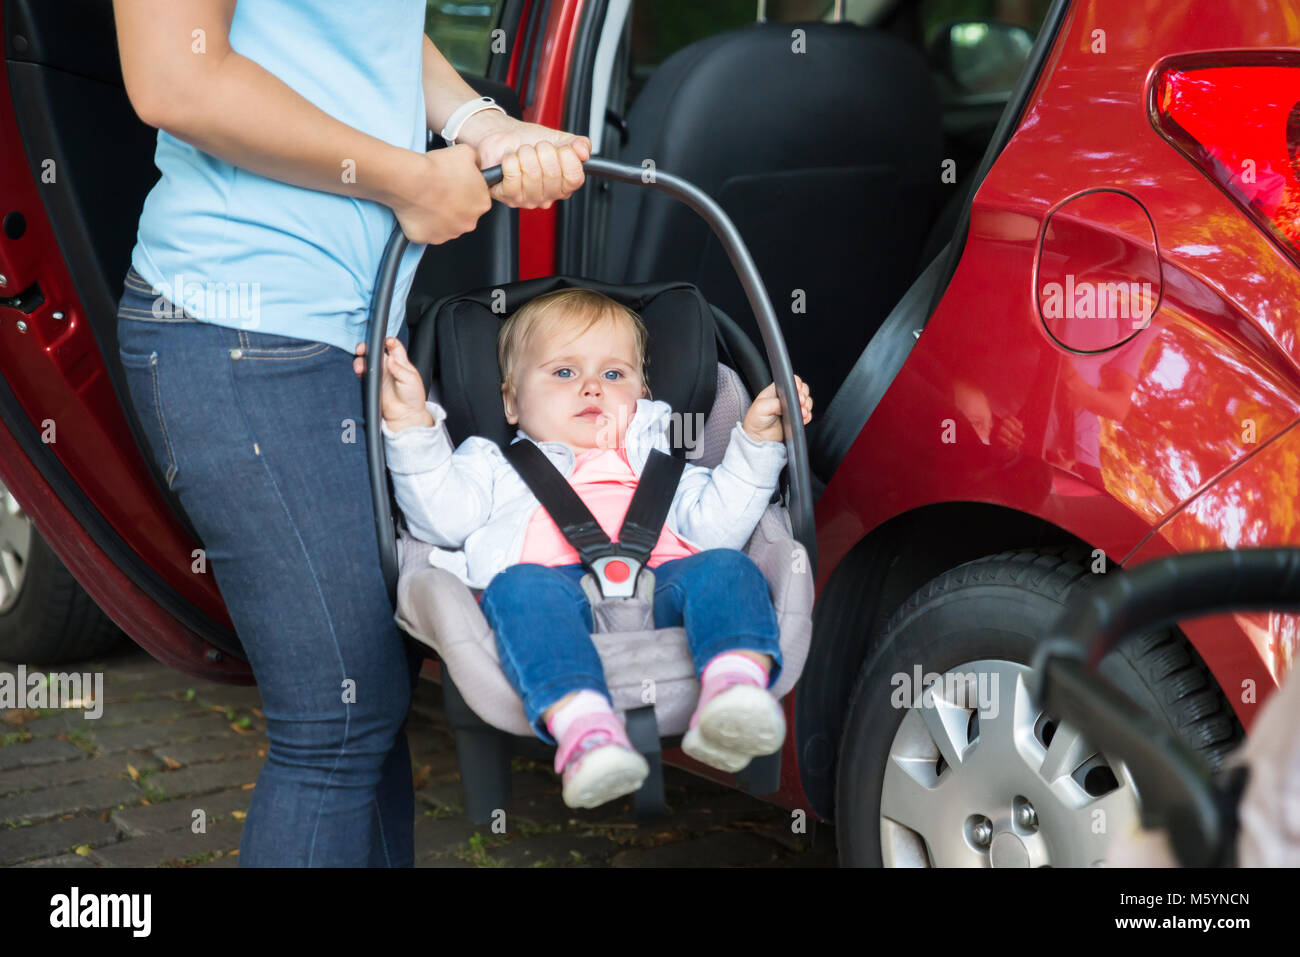 Mother Carrying Baby On Seat Outside Red Car Stock Photo